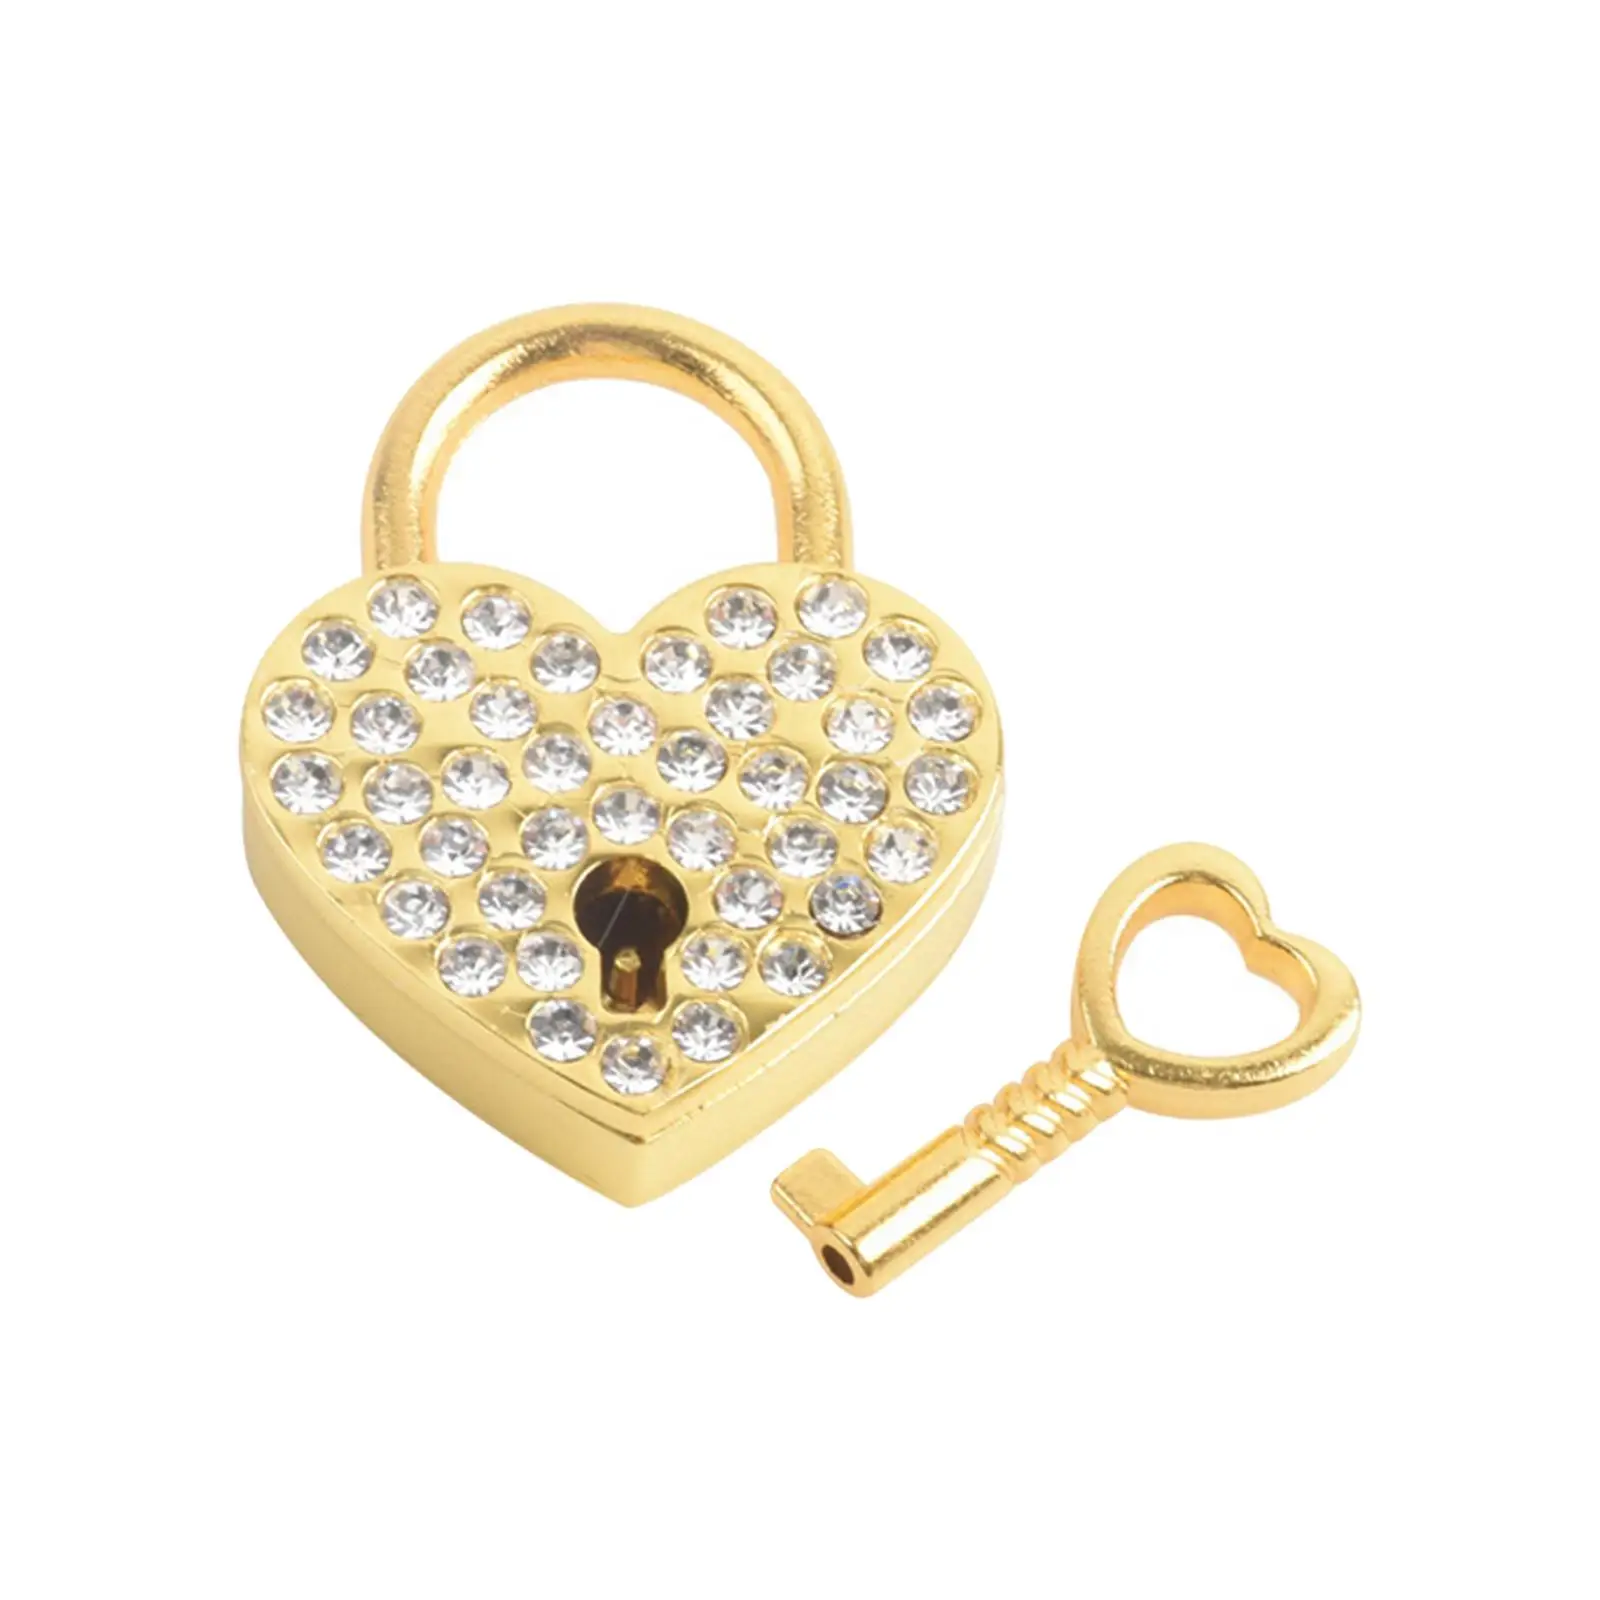 Small Lock Retro with Engraved Padlock for Wedding Security Travel Gym